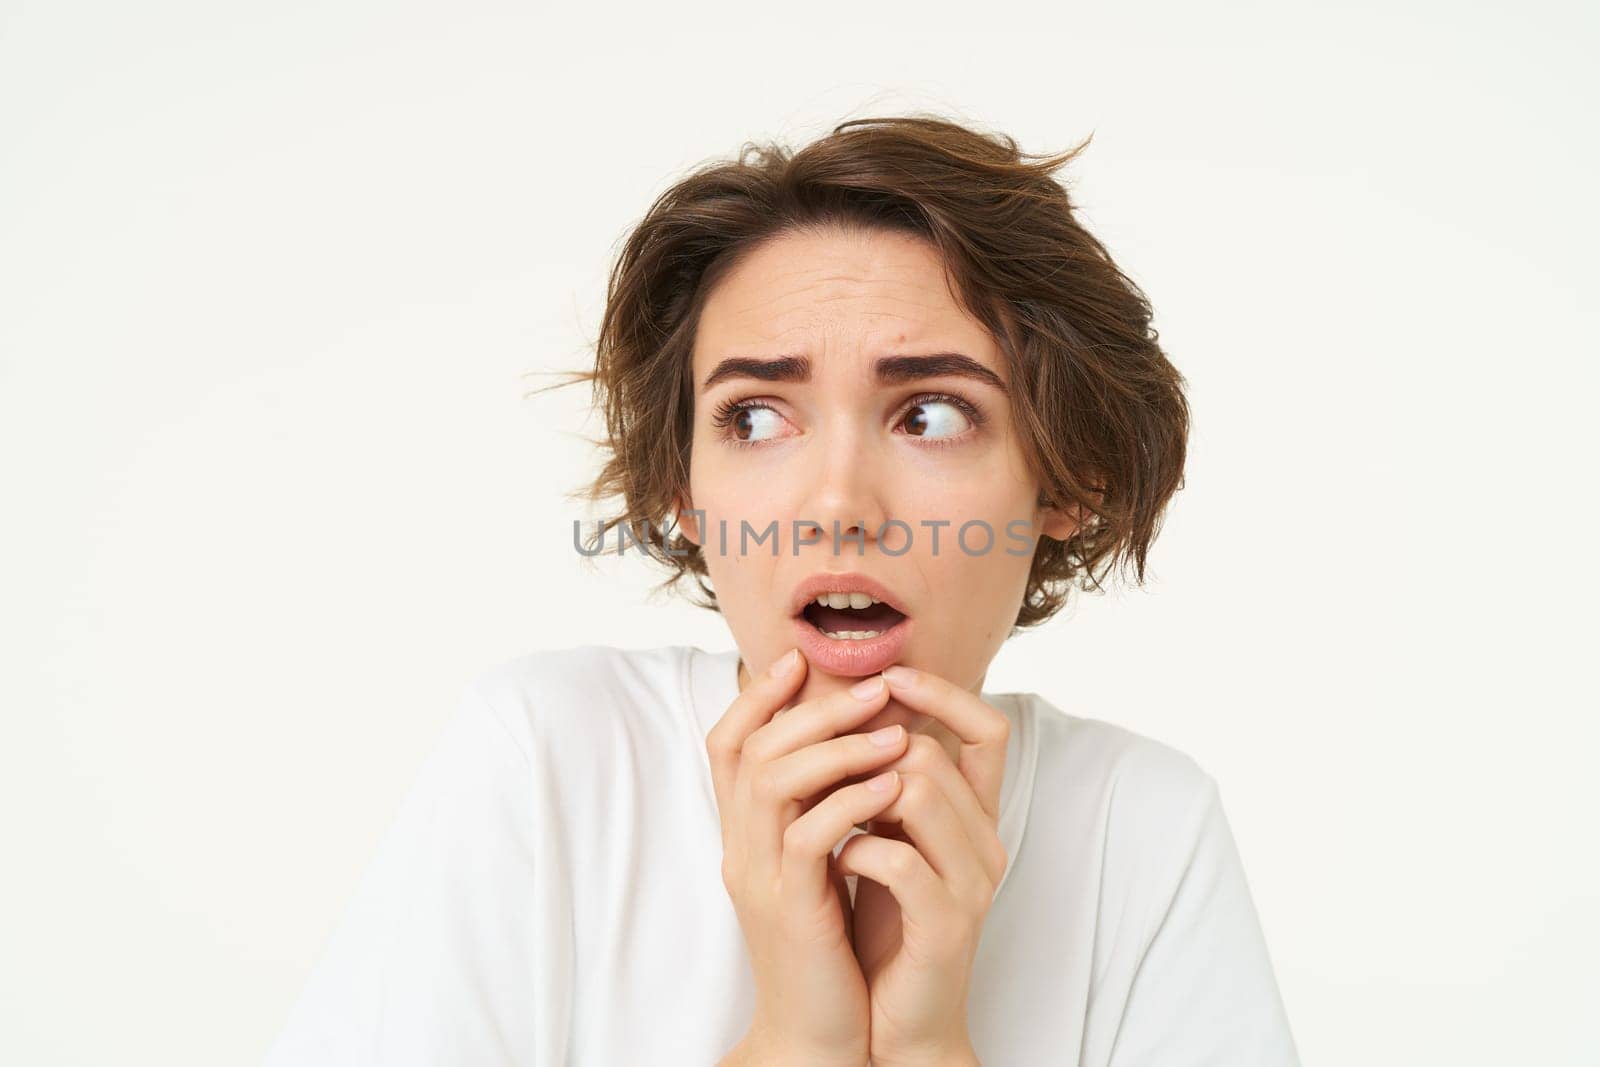 Close up of shocked, scared and worried young woman, trembling from fear, posing over white background.